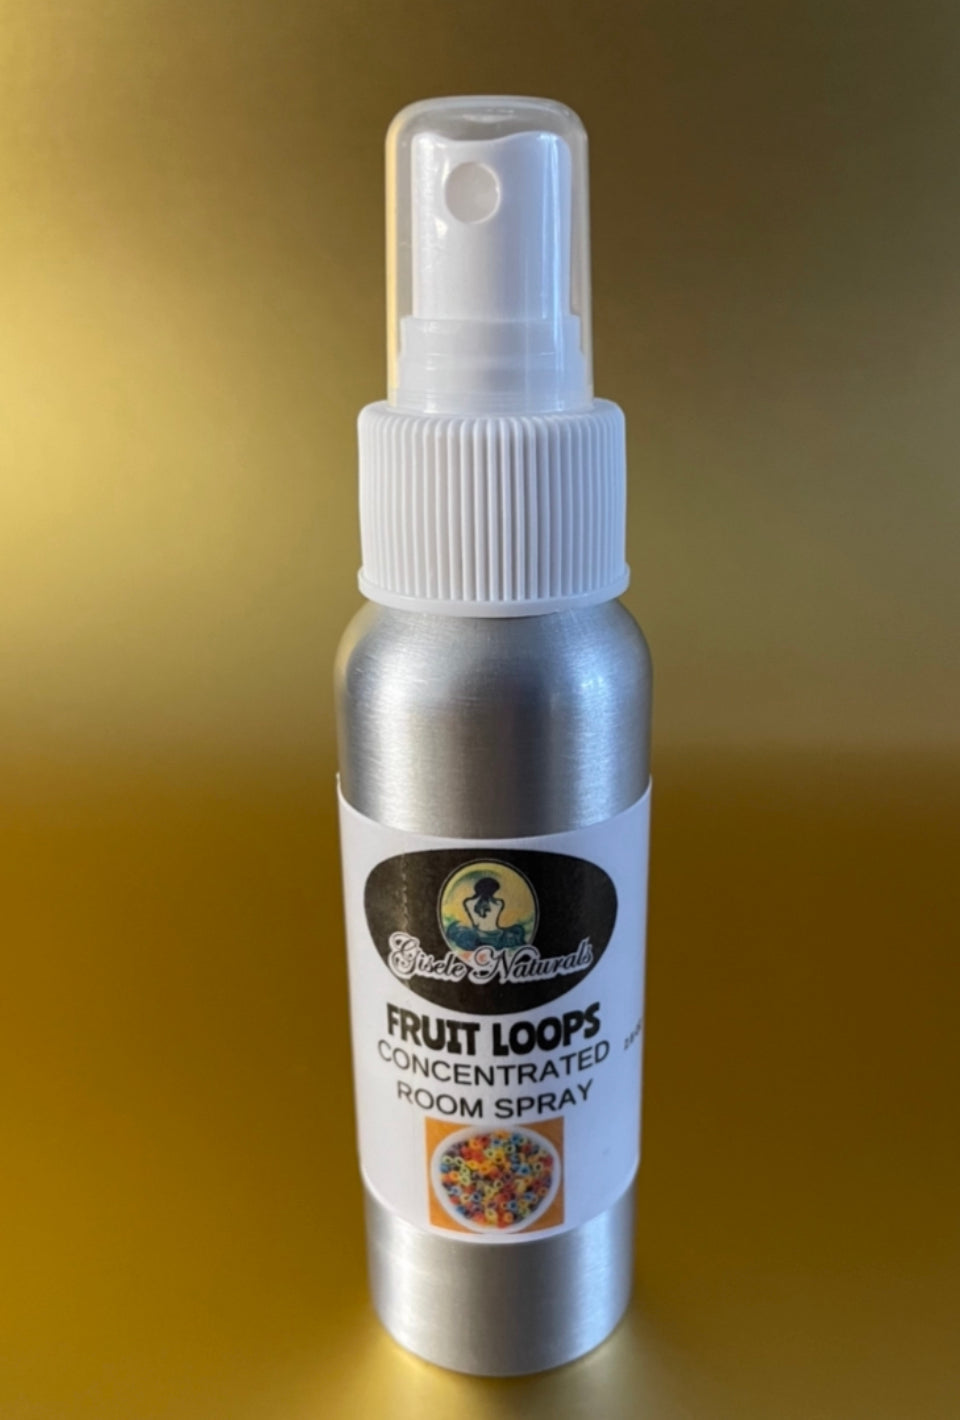 Fruit loops concentrated rom spray